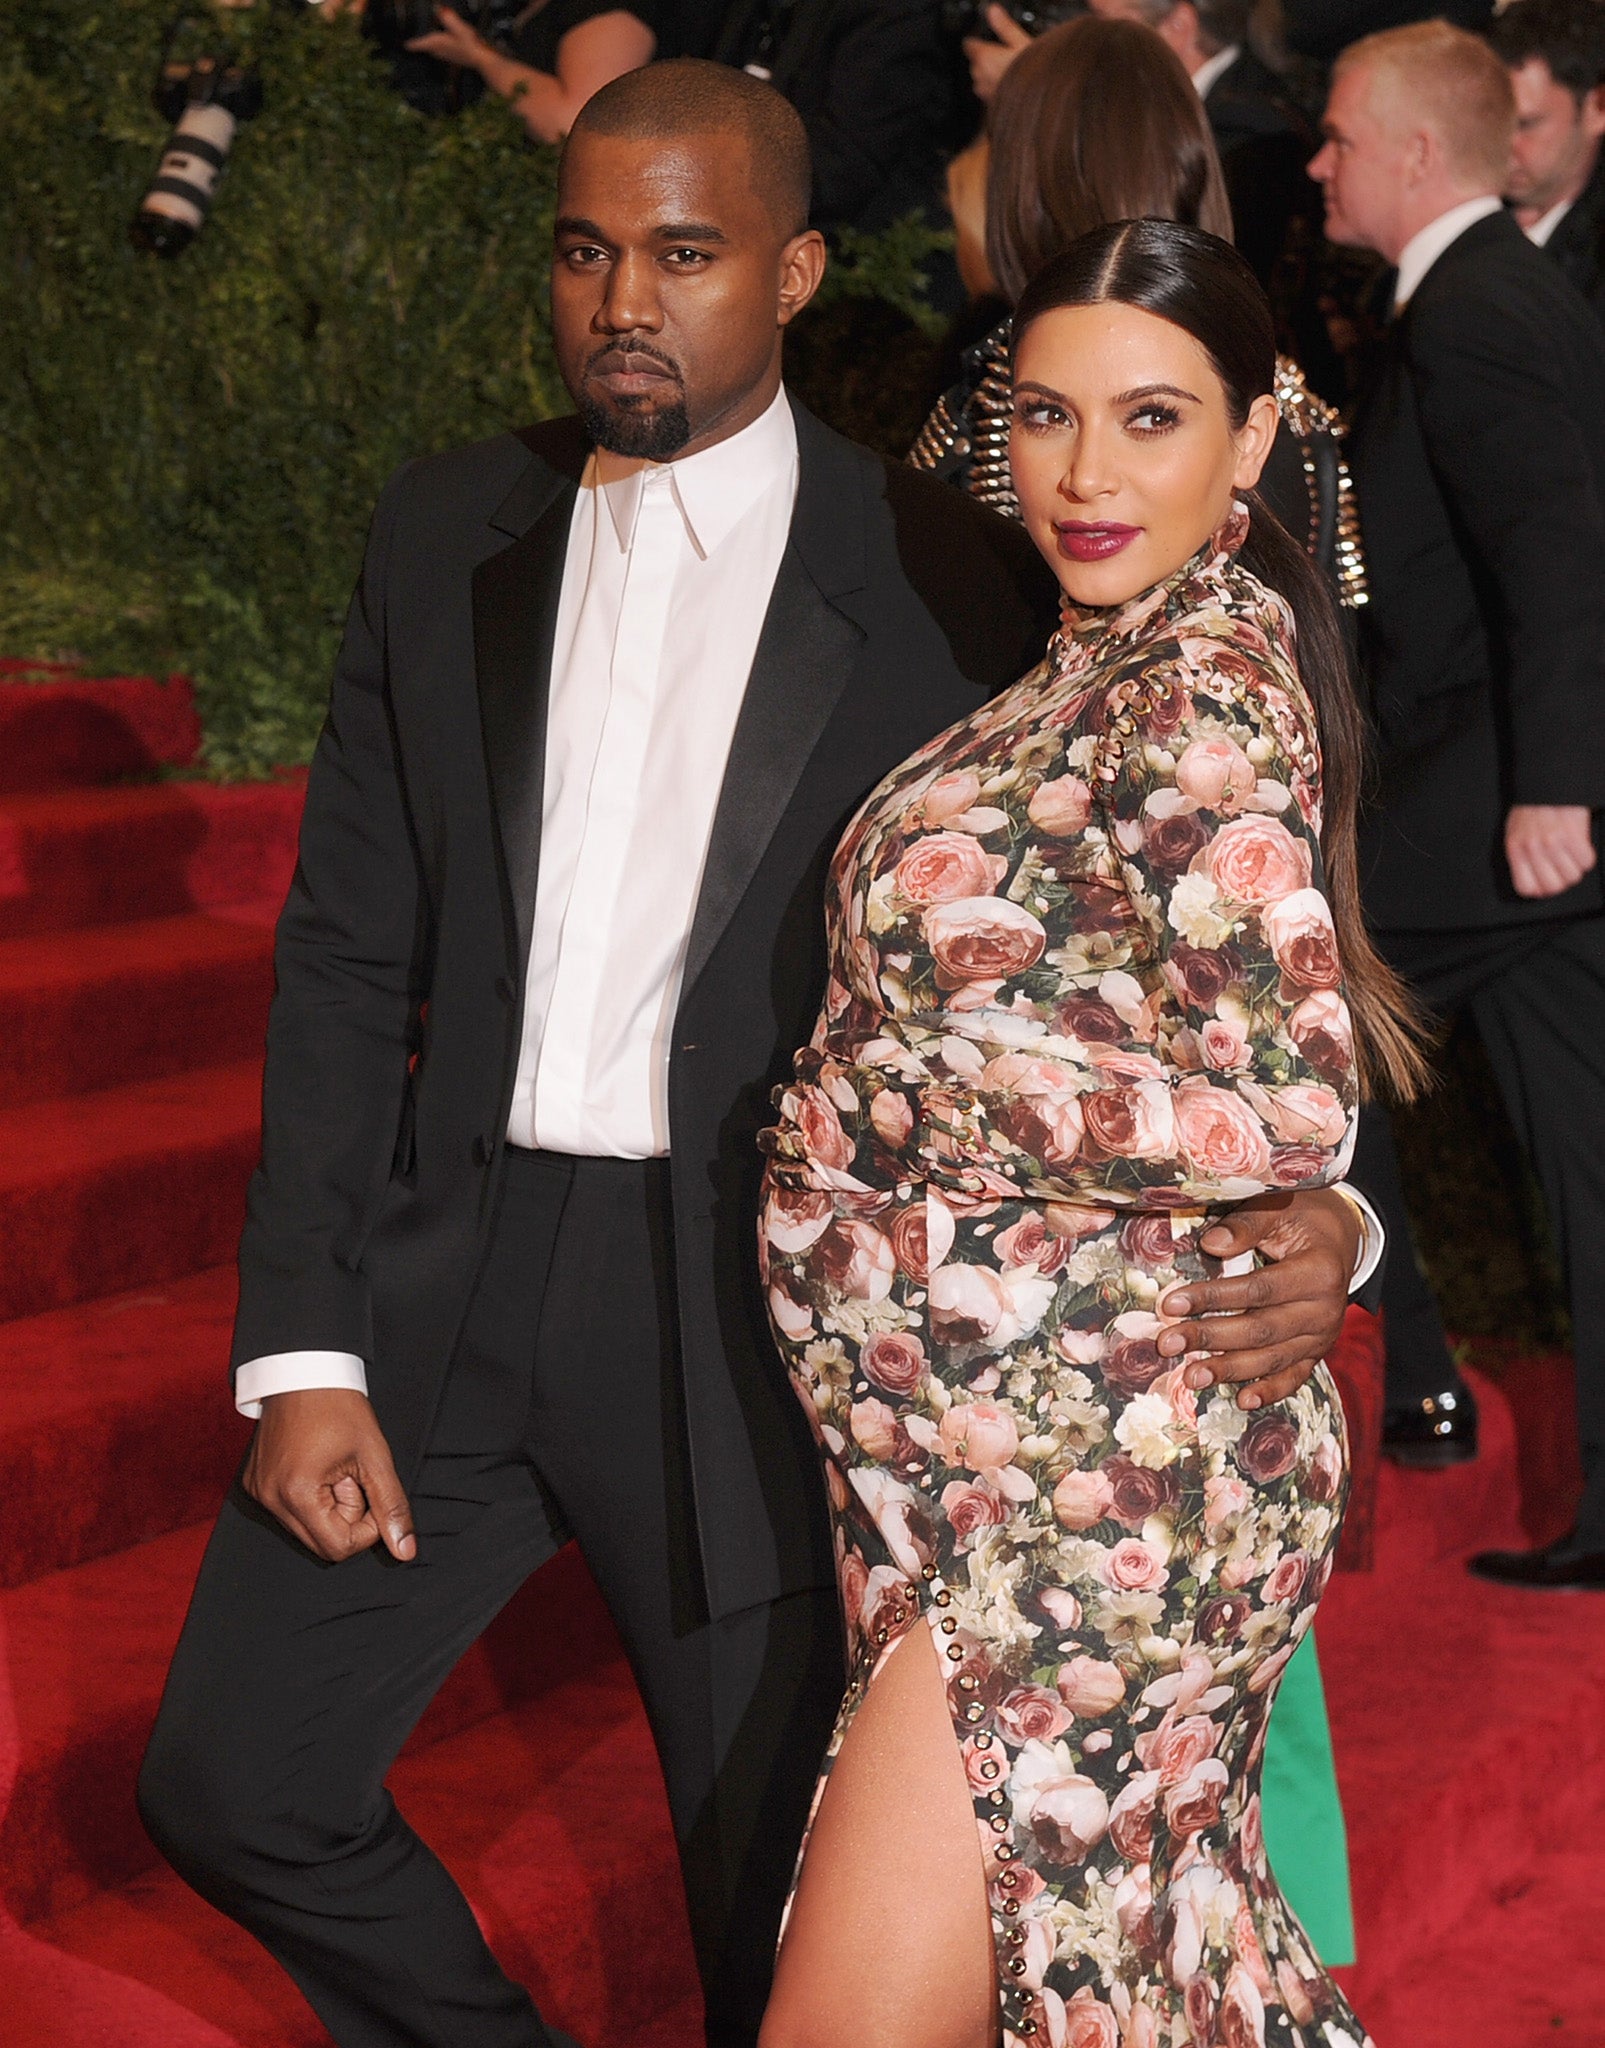 Kanye West and a heavily pregnant Kim Kardashian at the Met Ball in May. They have called their baby daughter North West